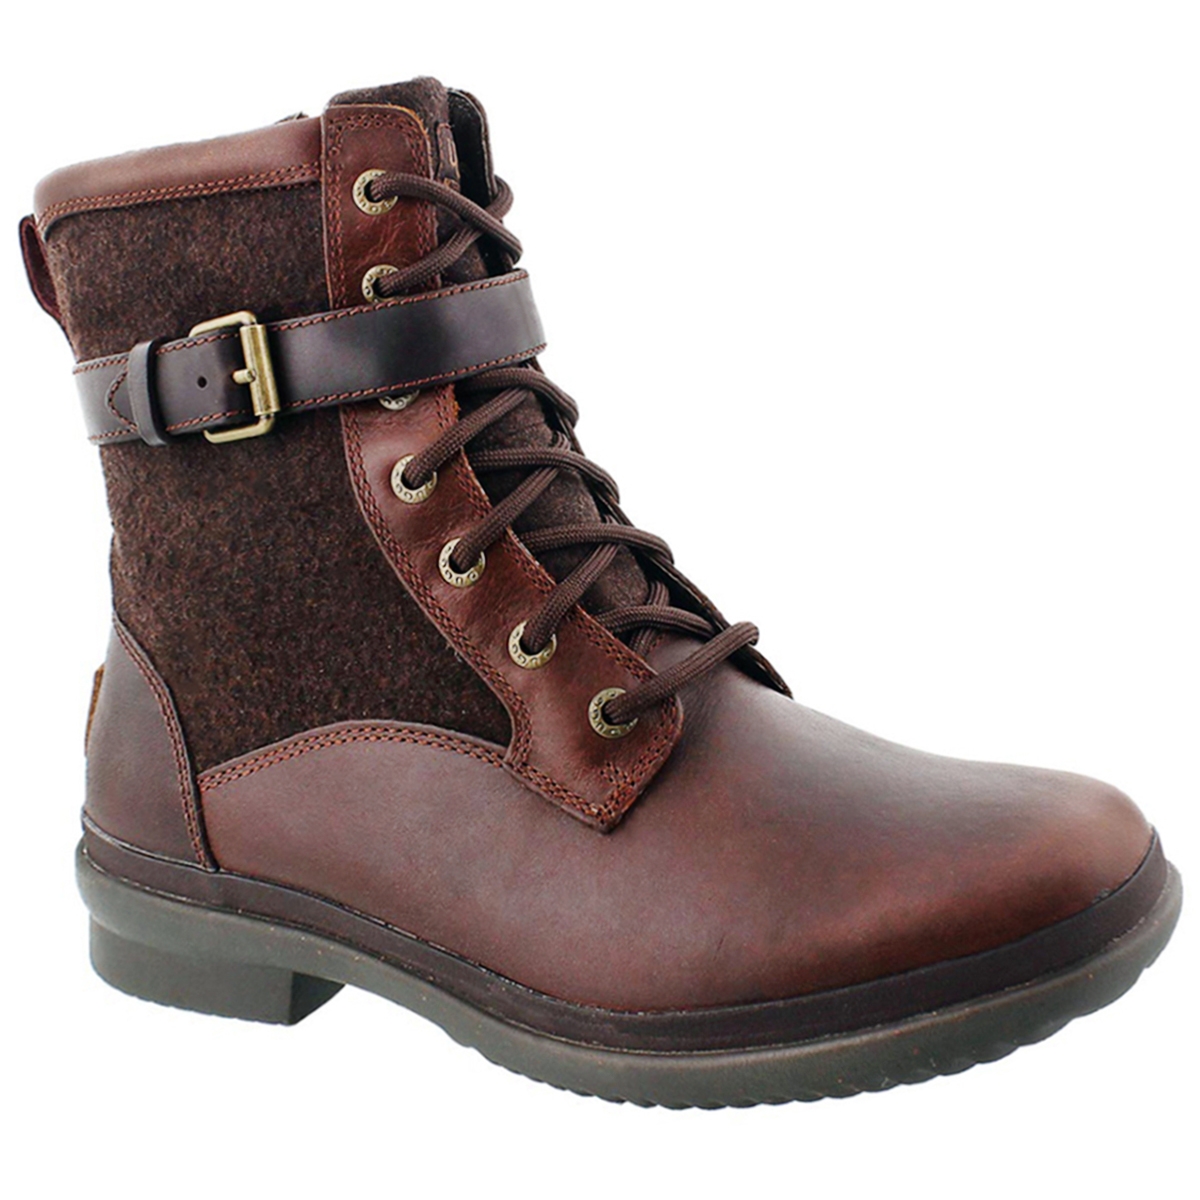 UGG Women's KESEY chestnut waterproof lace up | SoftMoc.com